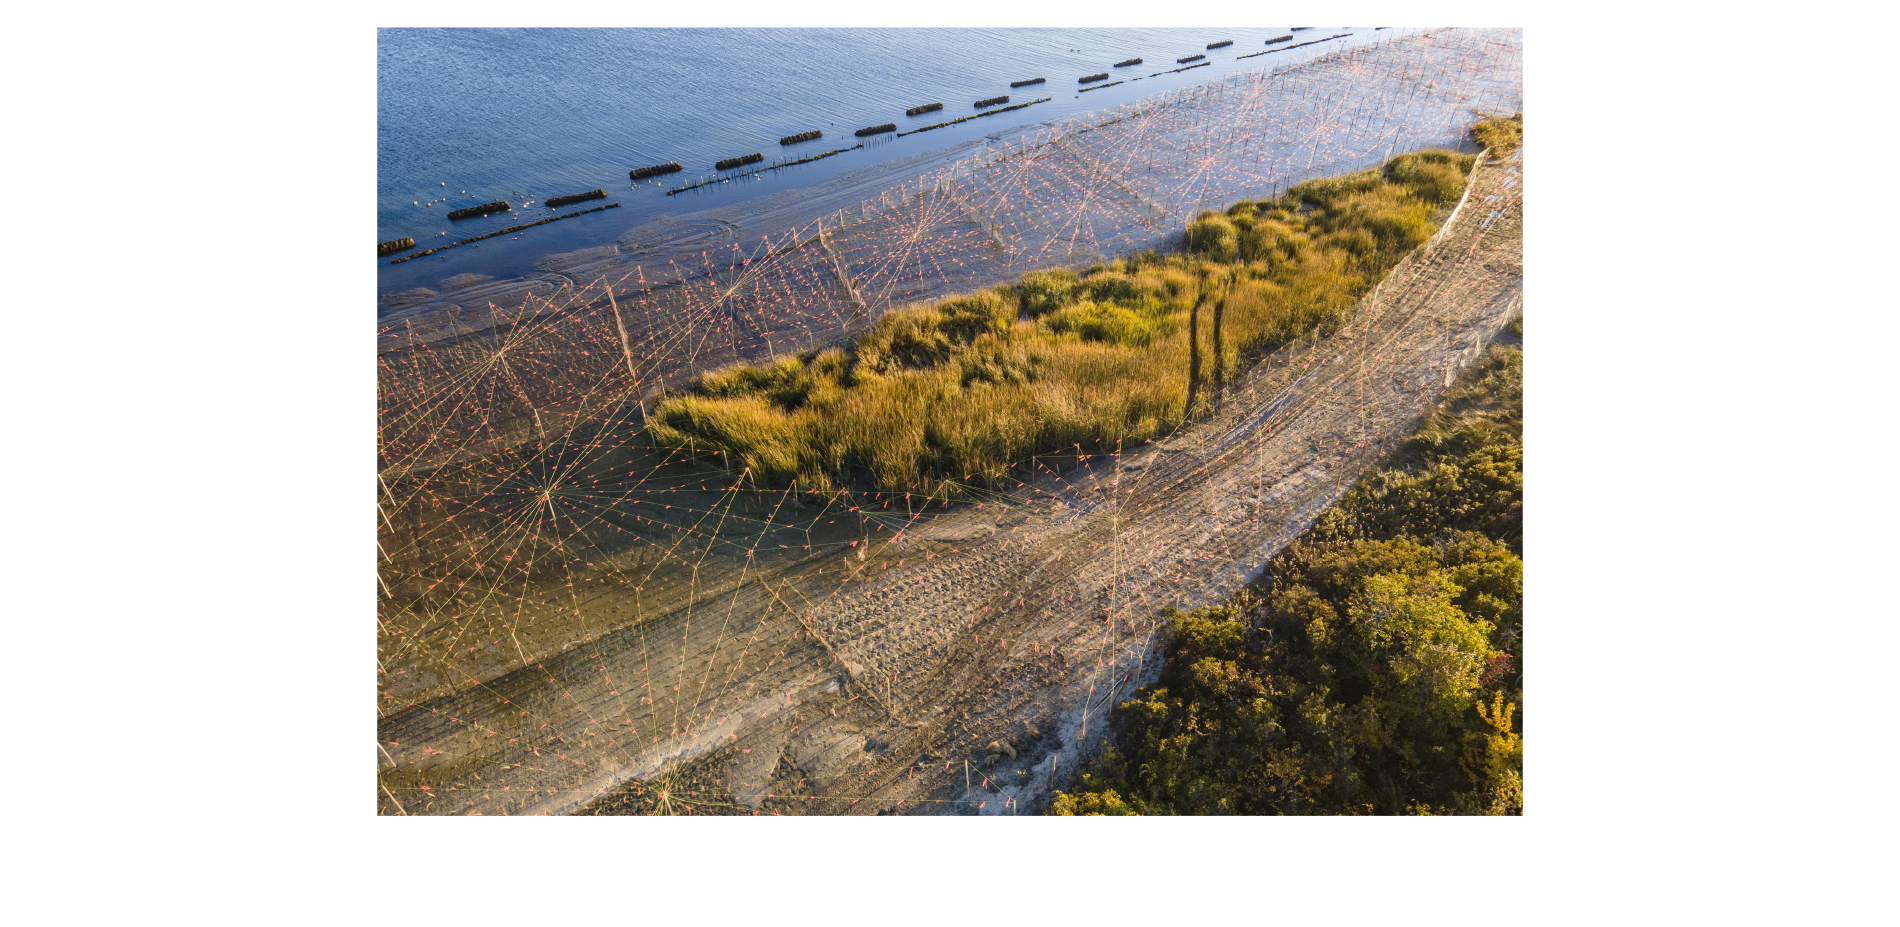 Living Shoreline: The breakwater structures attenuate wave action, allowing sediment to accrete in the newly constructed shoreline.